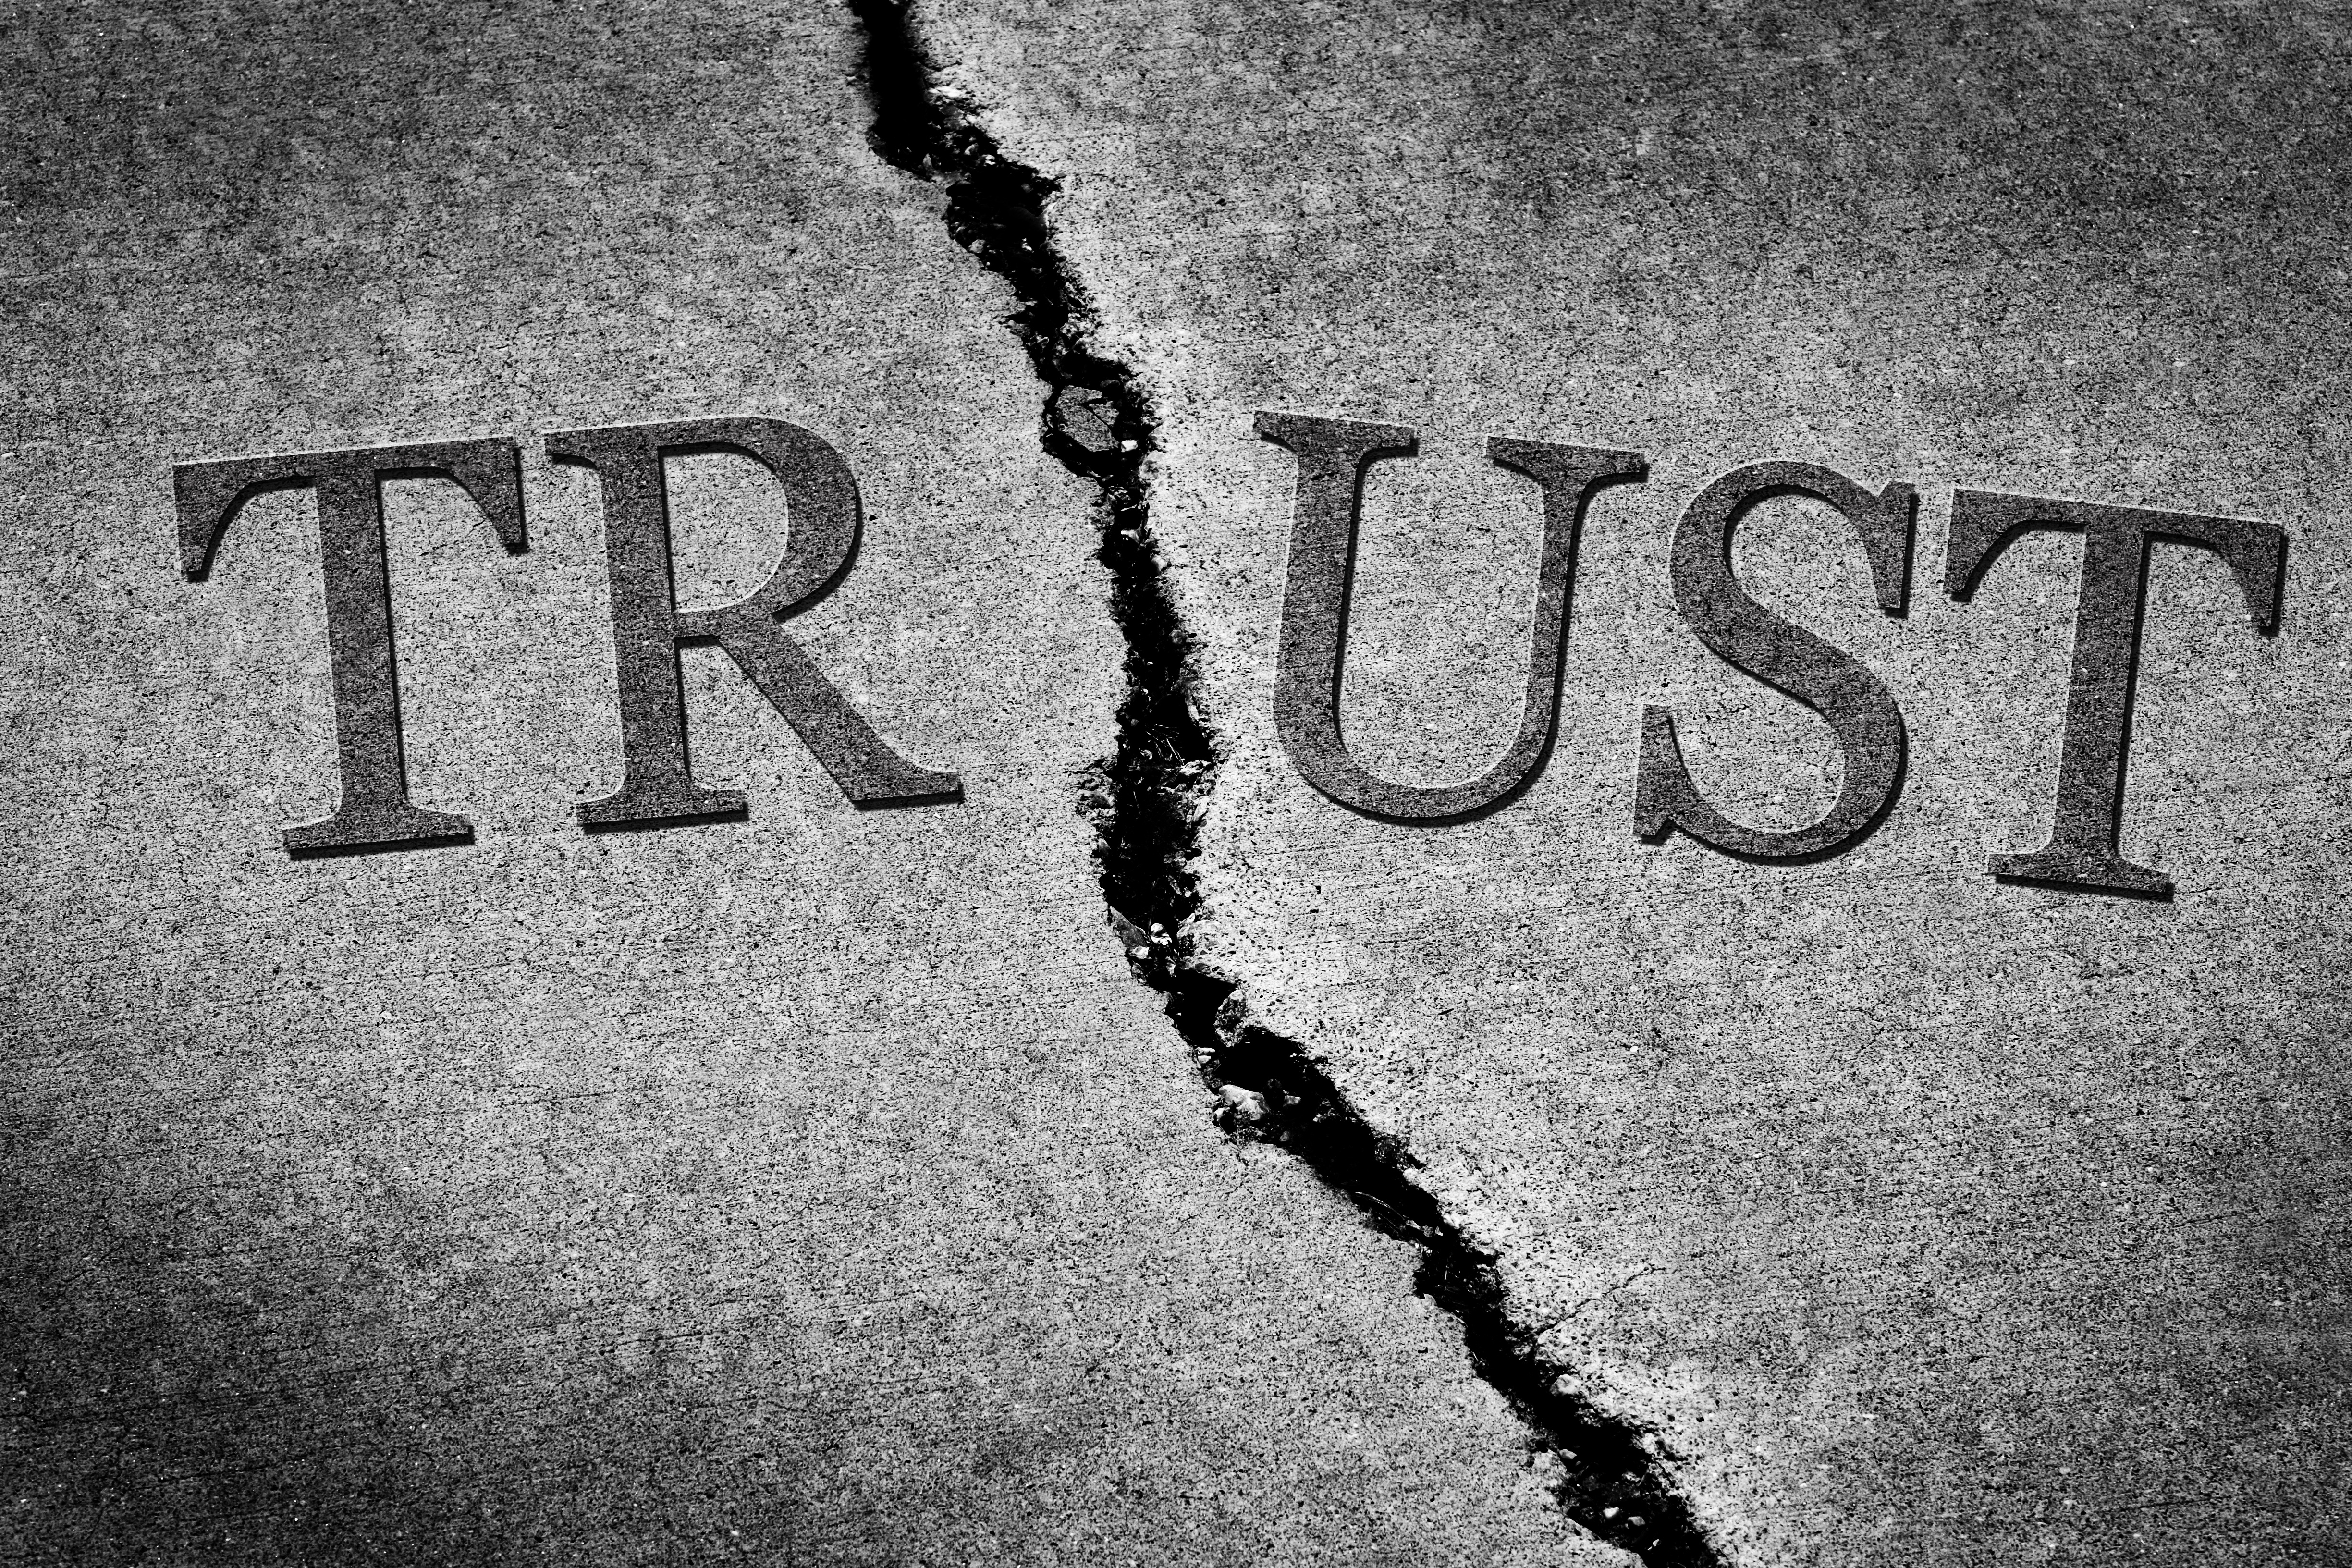 Old cracked sidewalk with the word "trust" cracked in half